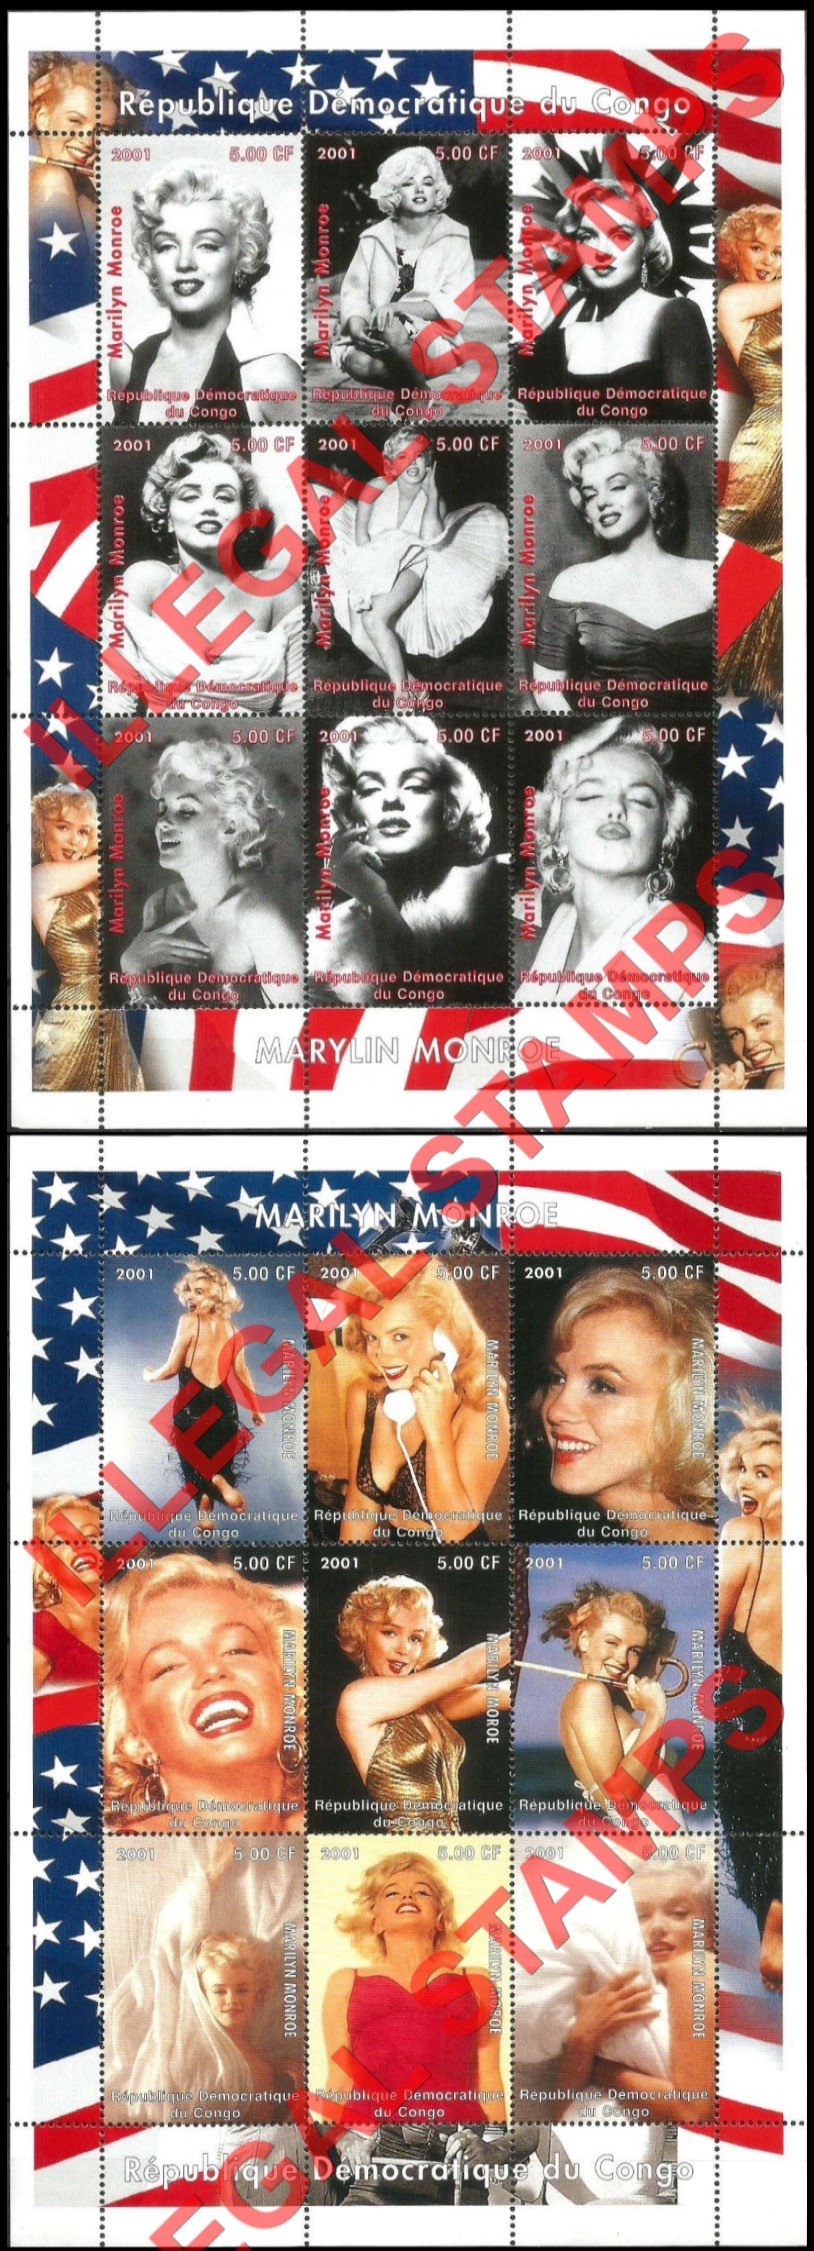 Congo Democratic Republic 2001 Marilyn Monroe Illegal Stamp Sheets of 9